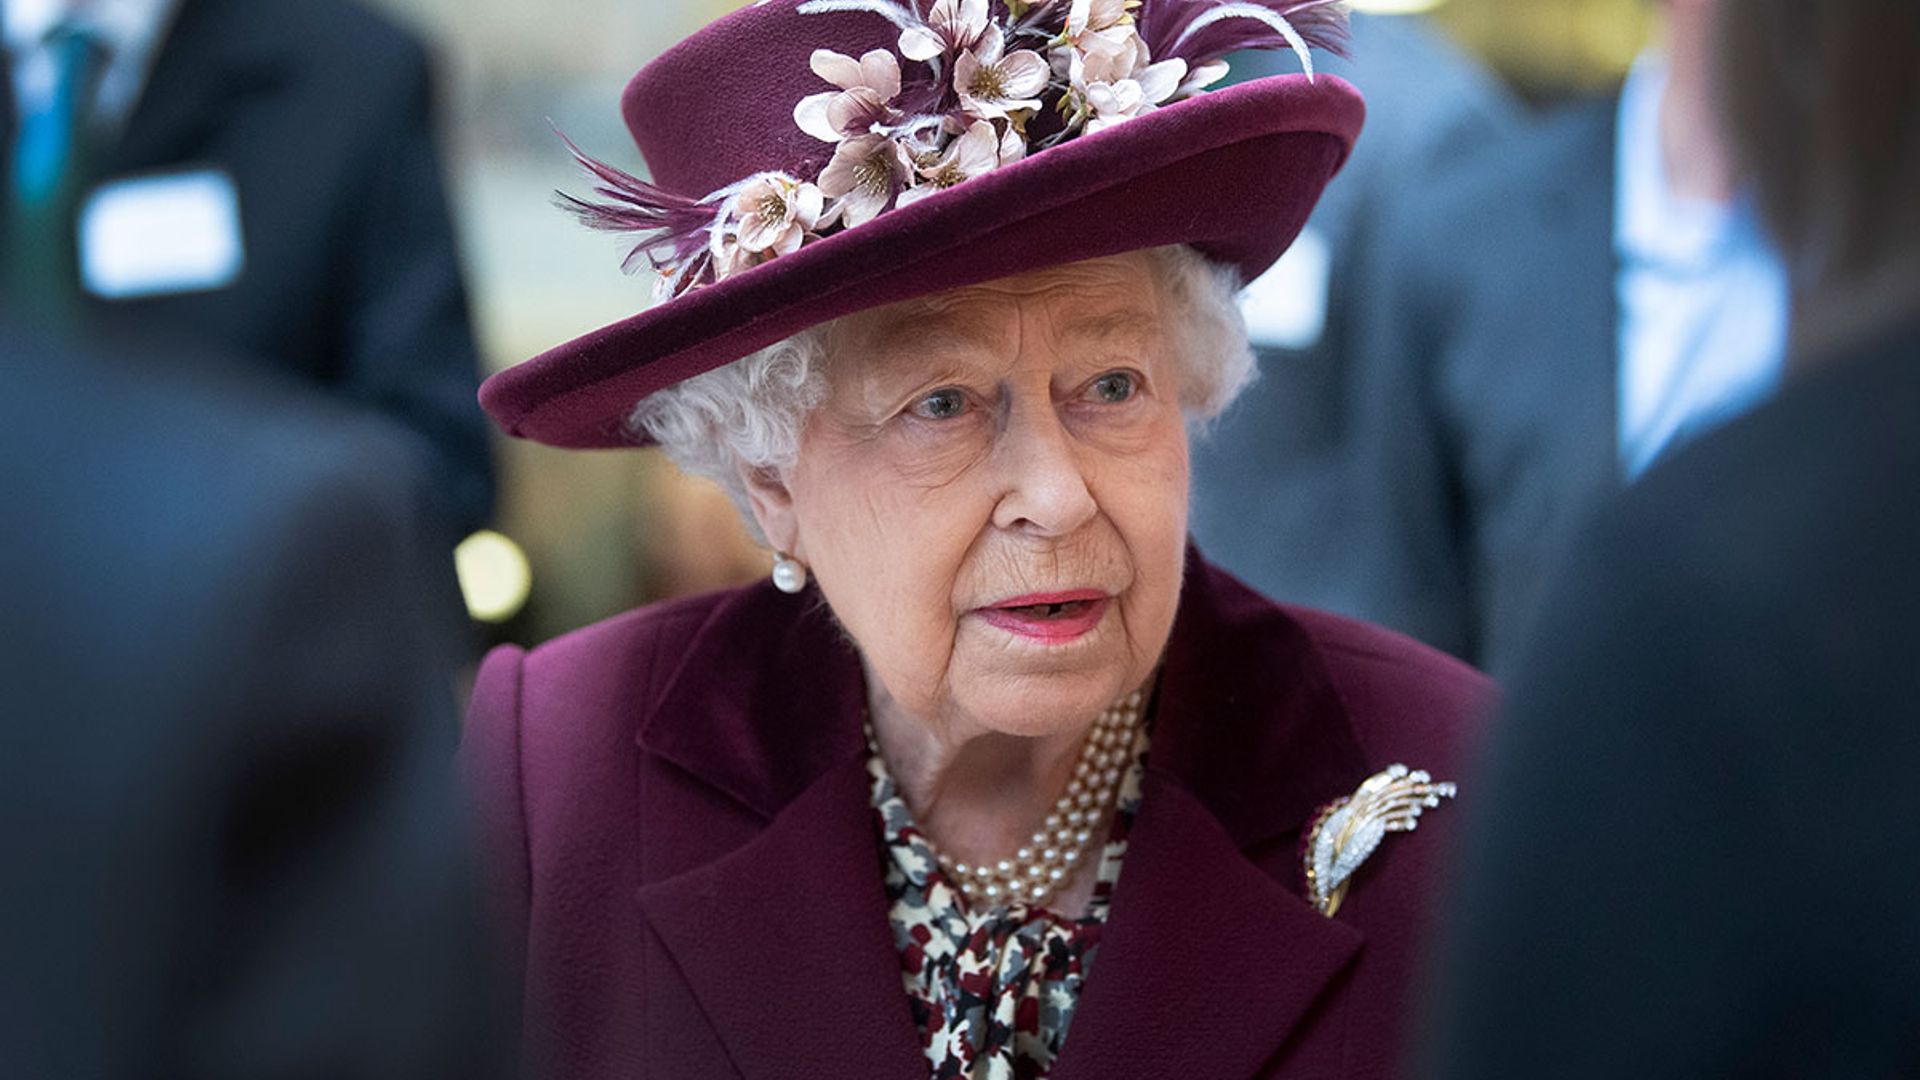 The Queen receives disappointing news from Royal Ascot